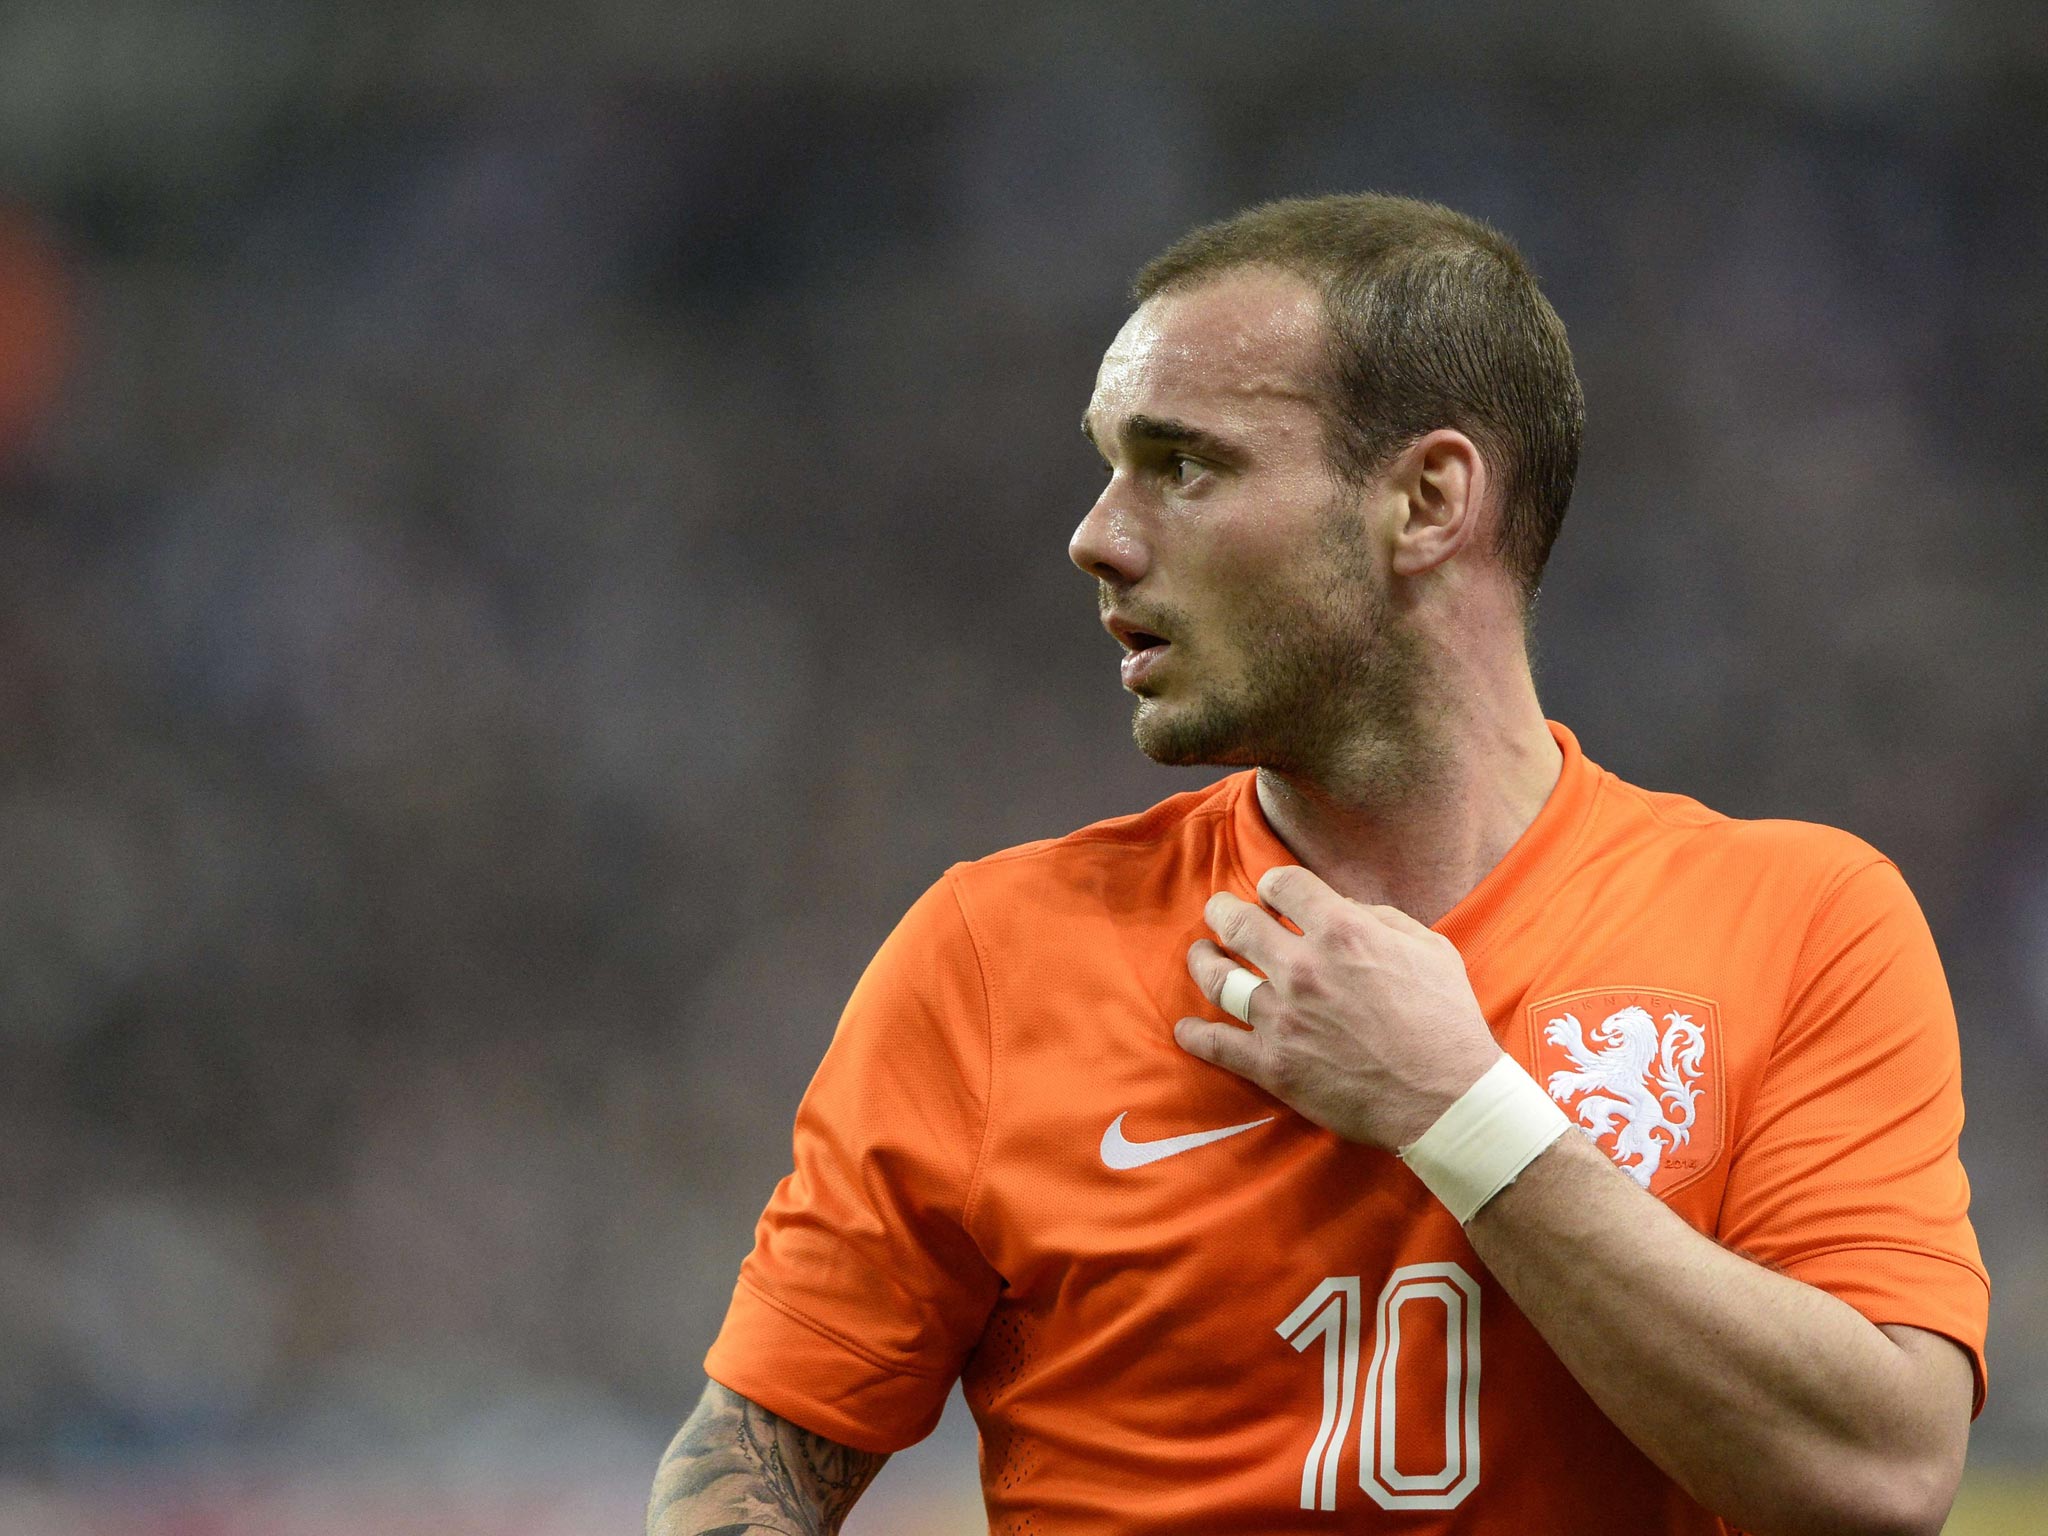 The Netherlands’ Wesley Sneijder may struggle to repeat his heroics of 2010